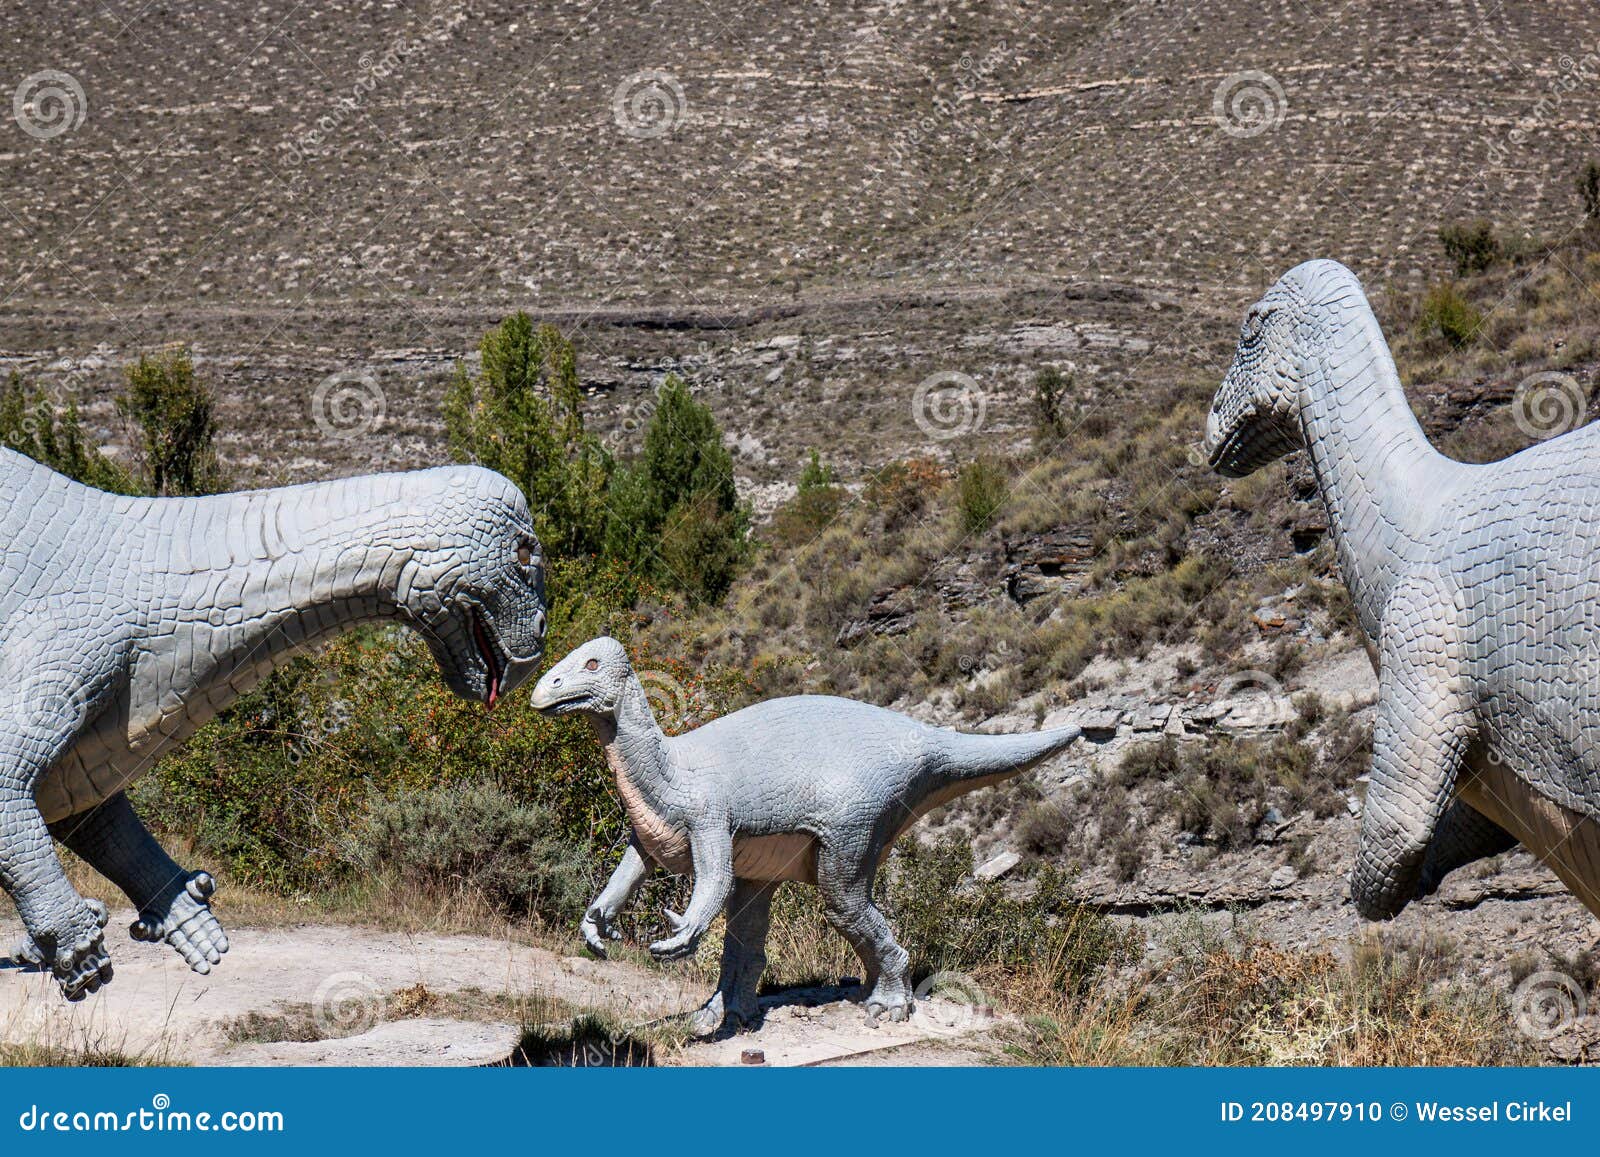 dinosaur family in the spanish municipality of enciso